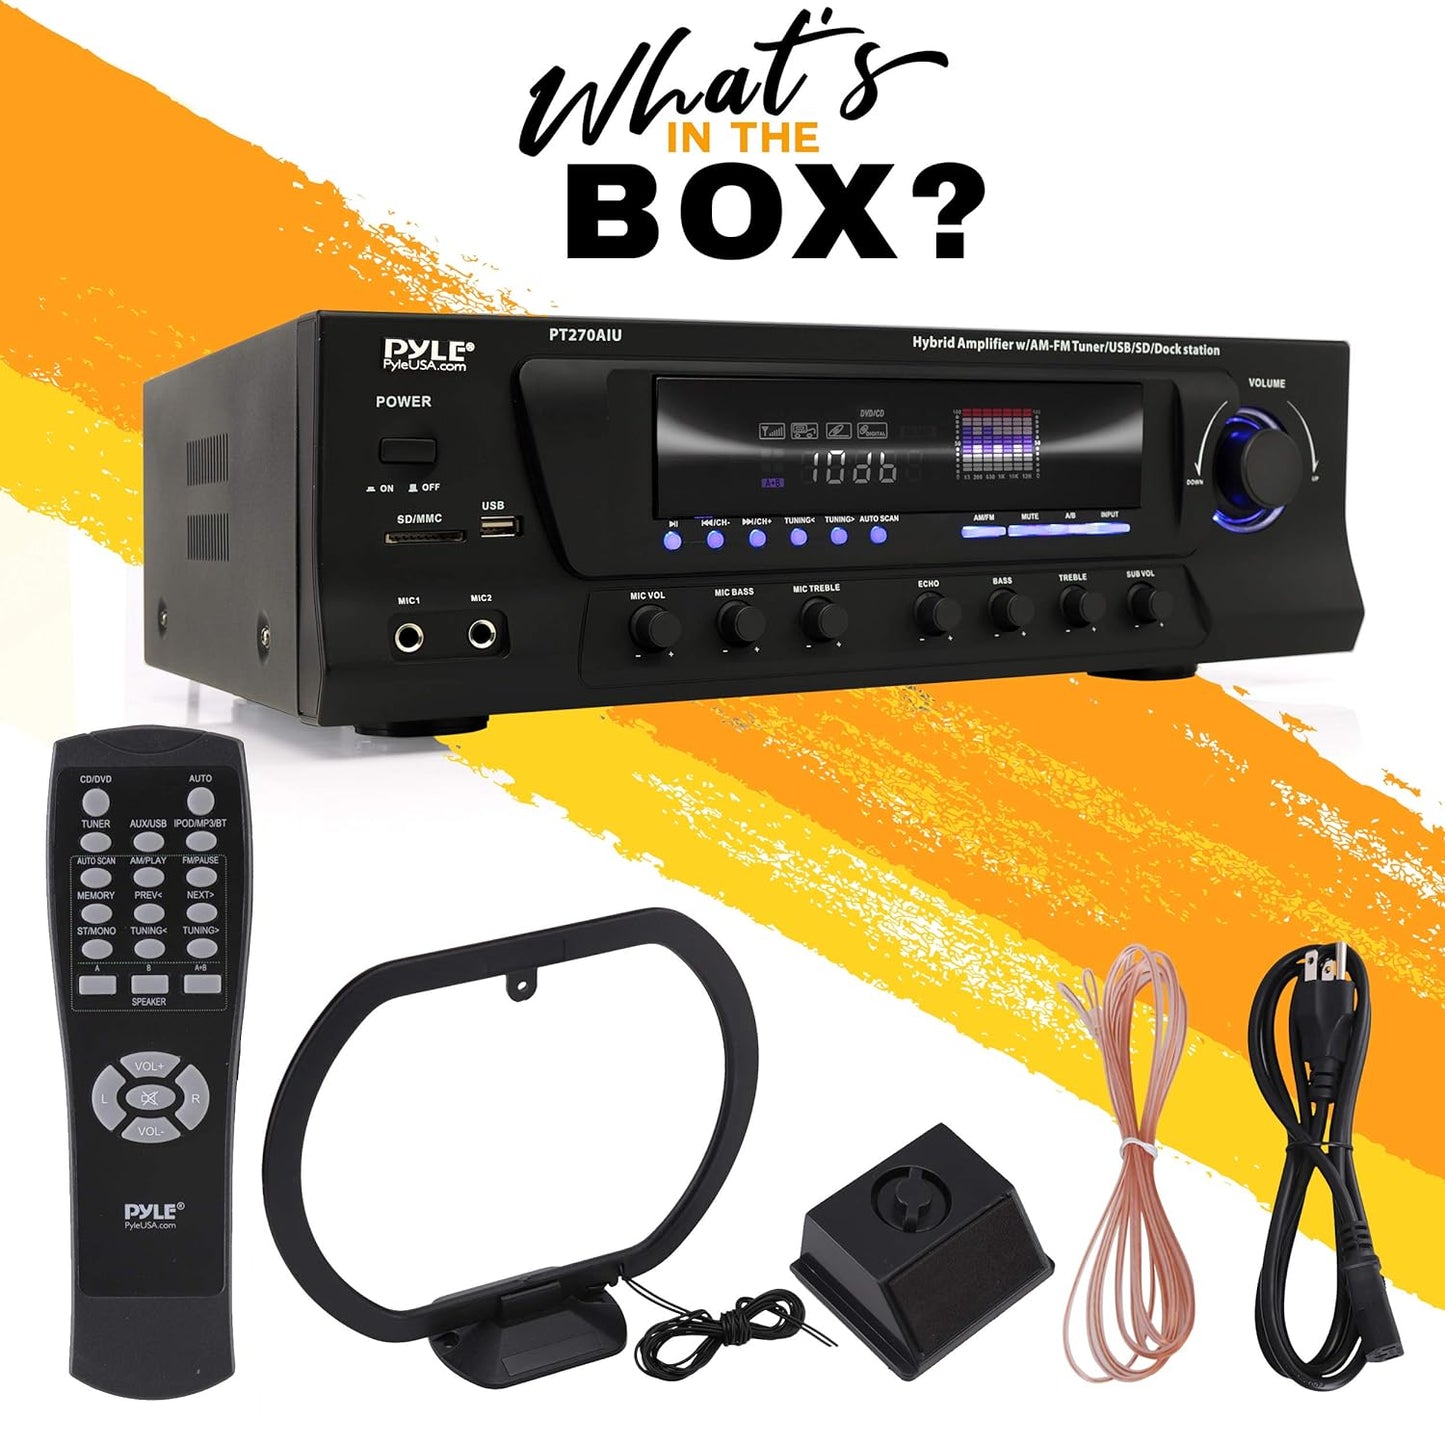 300W Digital Stereo Receiver System - AM/FM Qtz. Synthesized Tuner, USB/SD Card MP3 Player & Subwoofer Control, A/B Speaker, iPod/MP3 Input w/Karaoke, Cable & Remote Sensor - Pyle PT270AIU.5